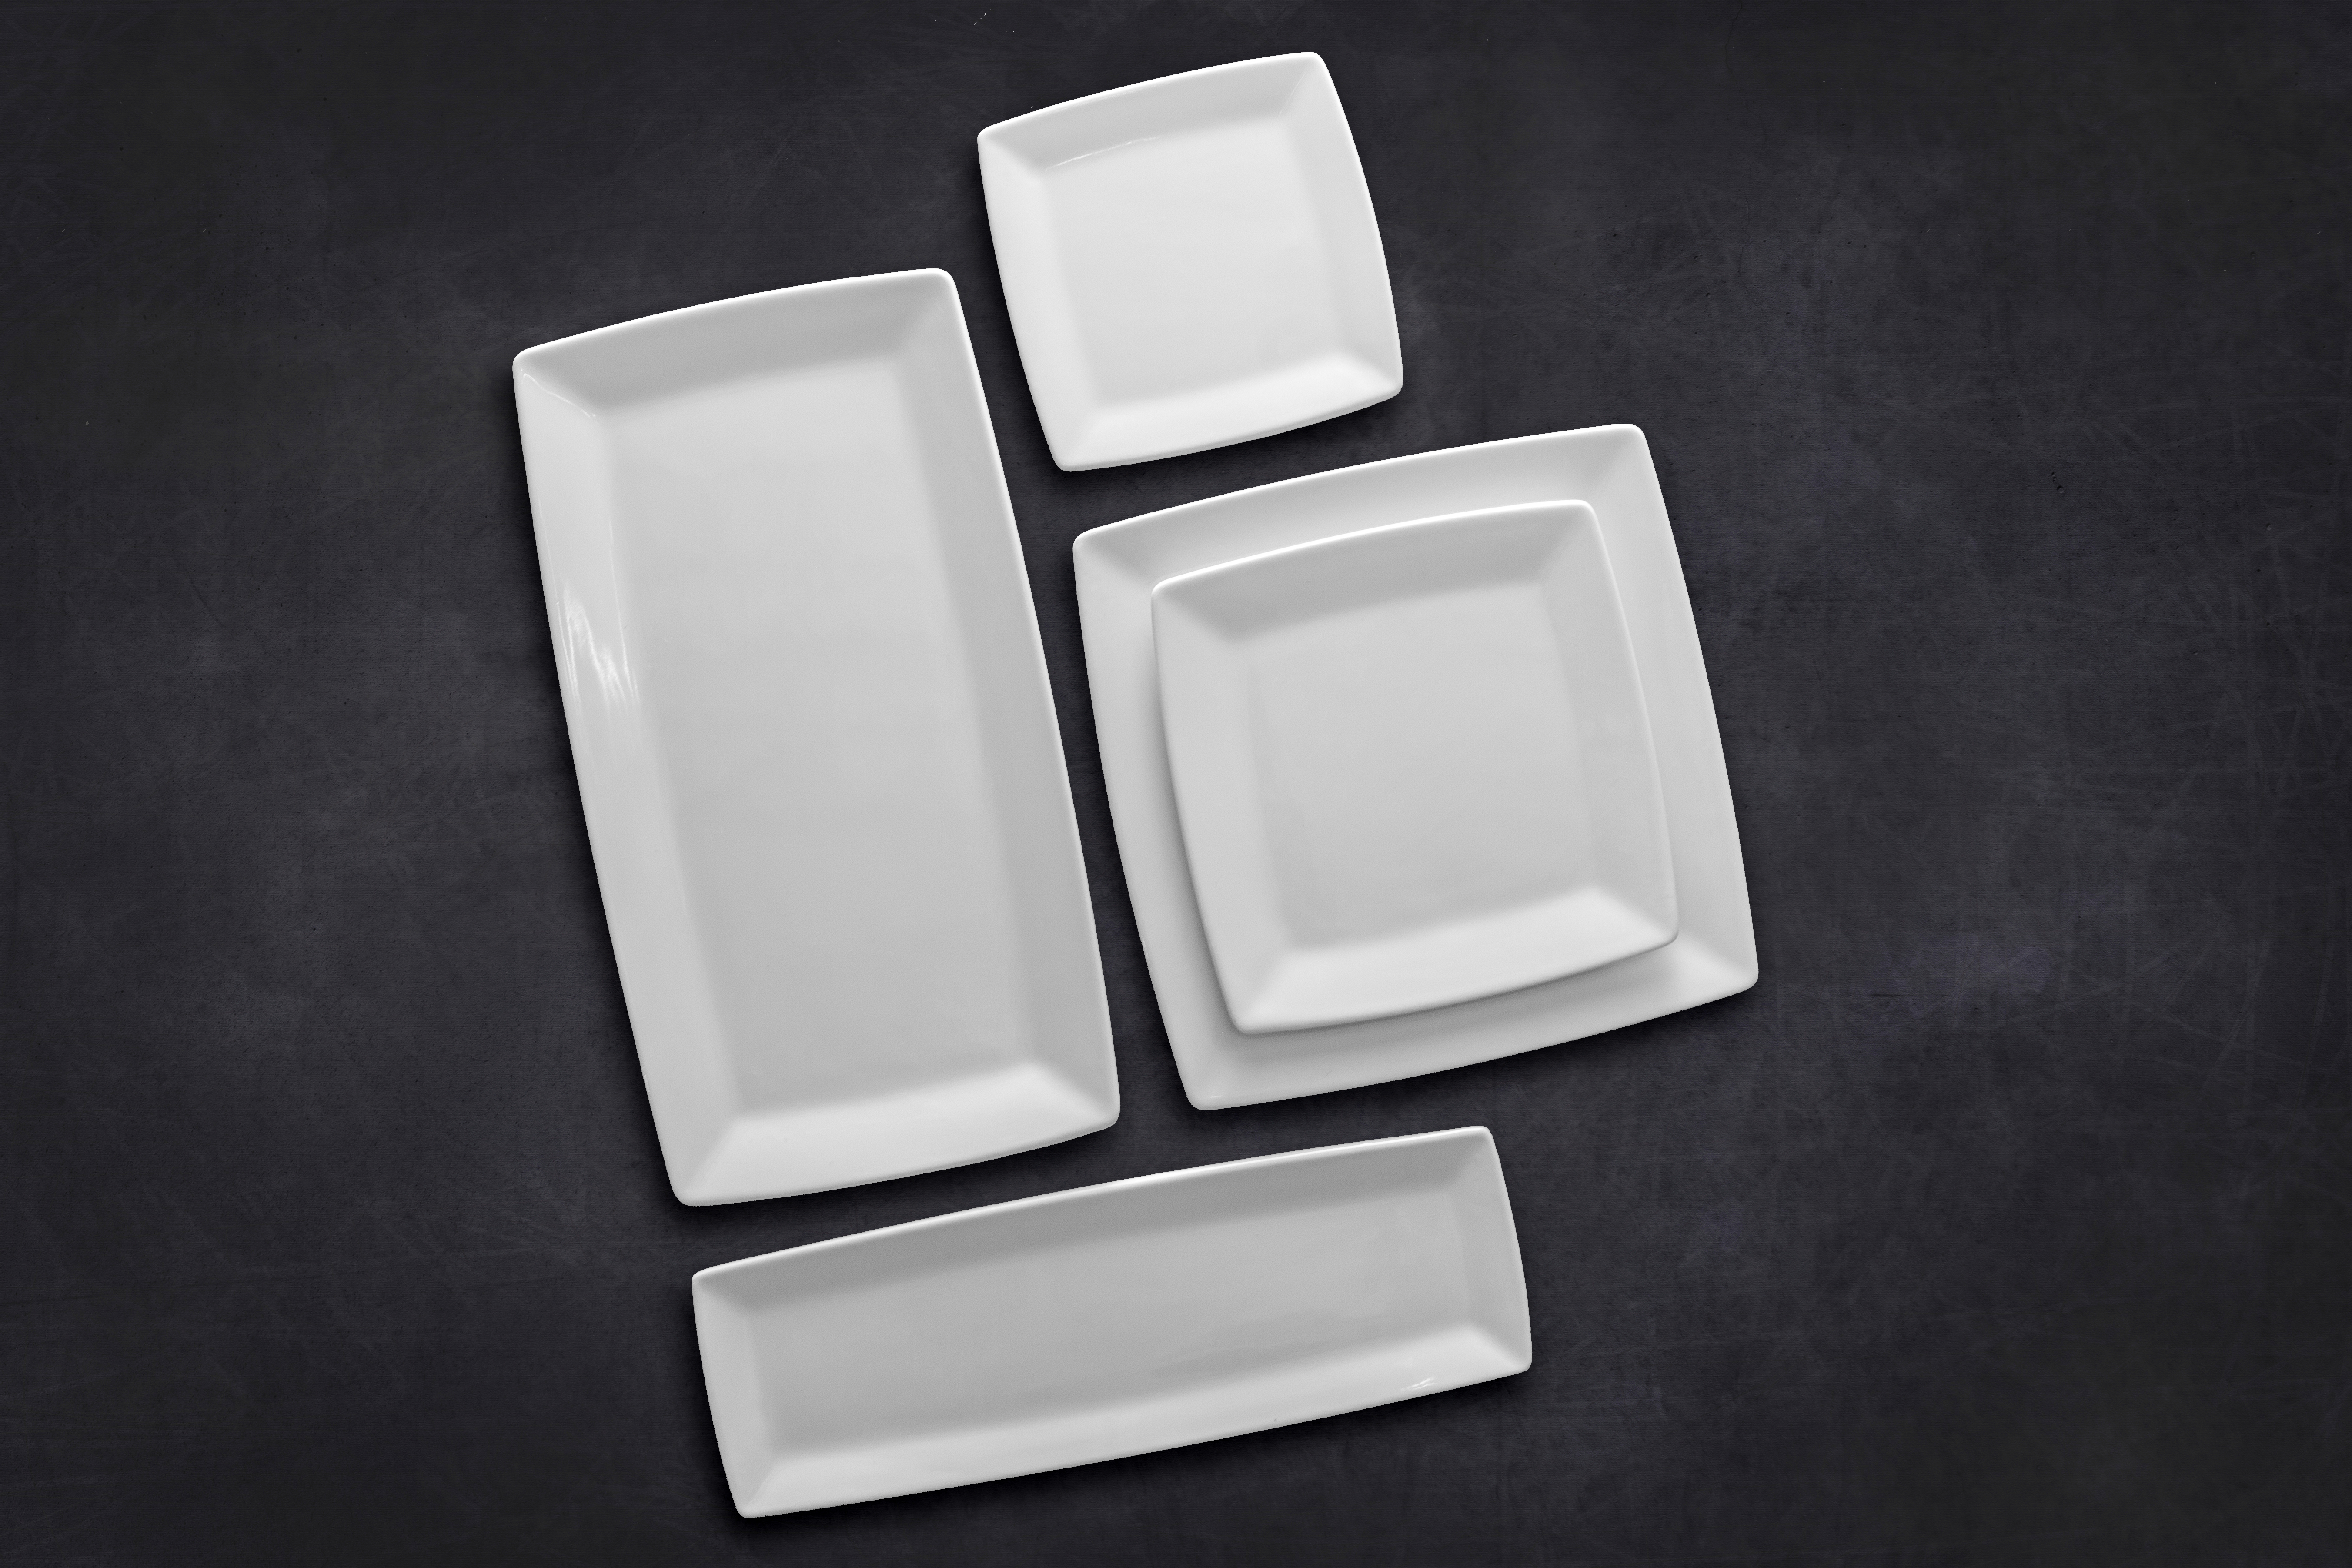 White square and rectangle plates